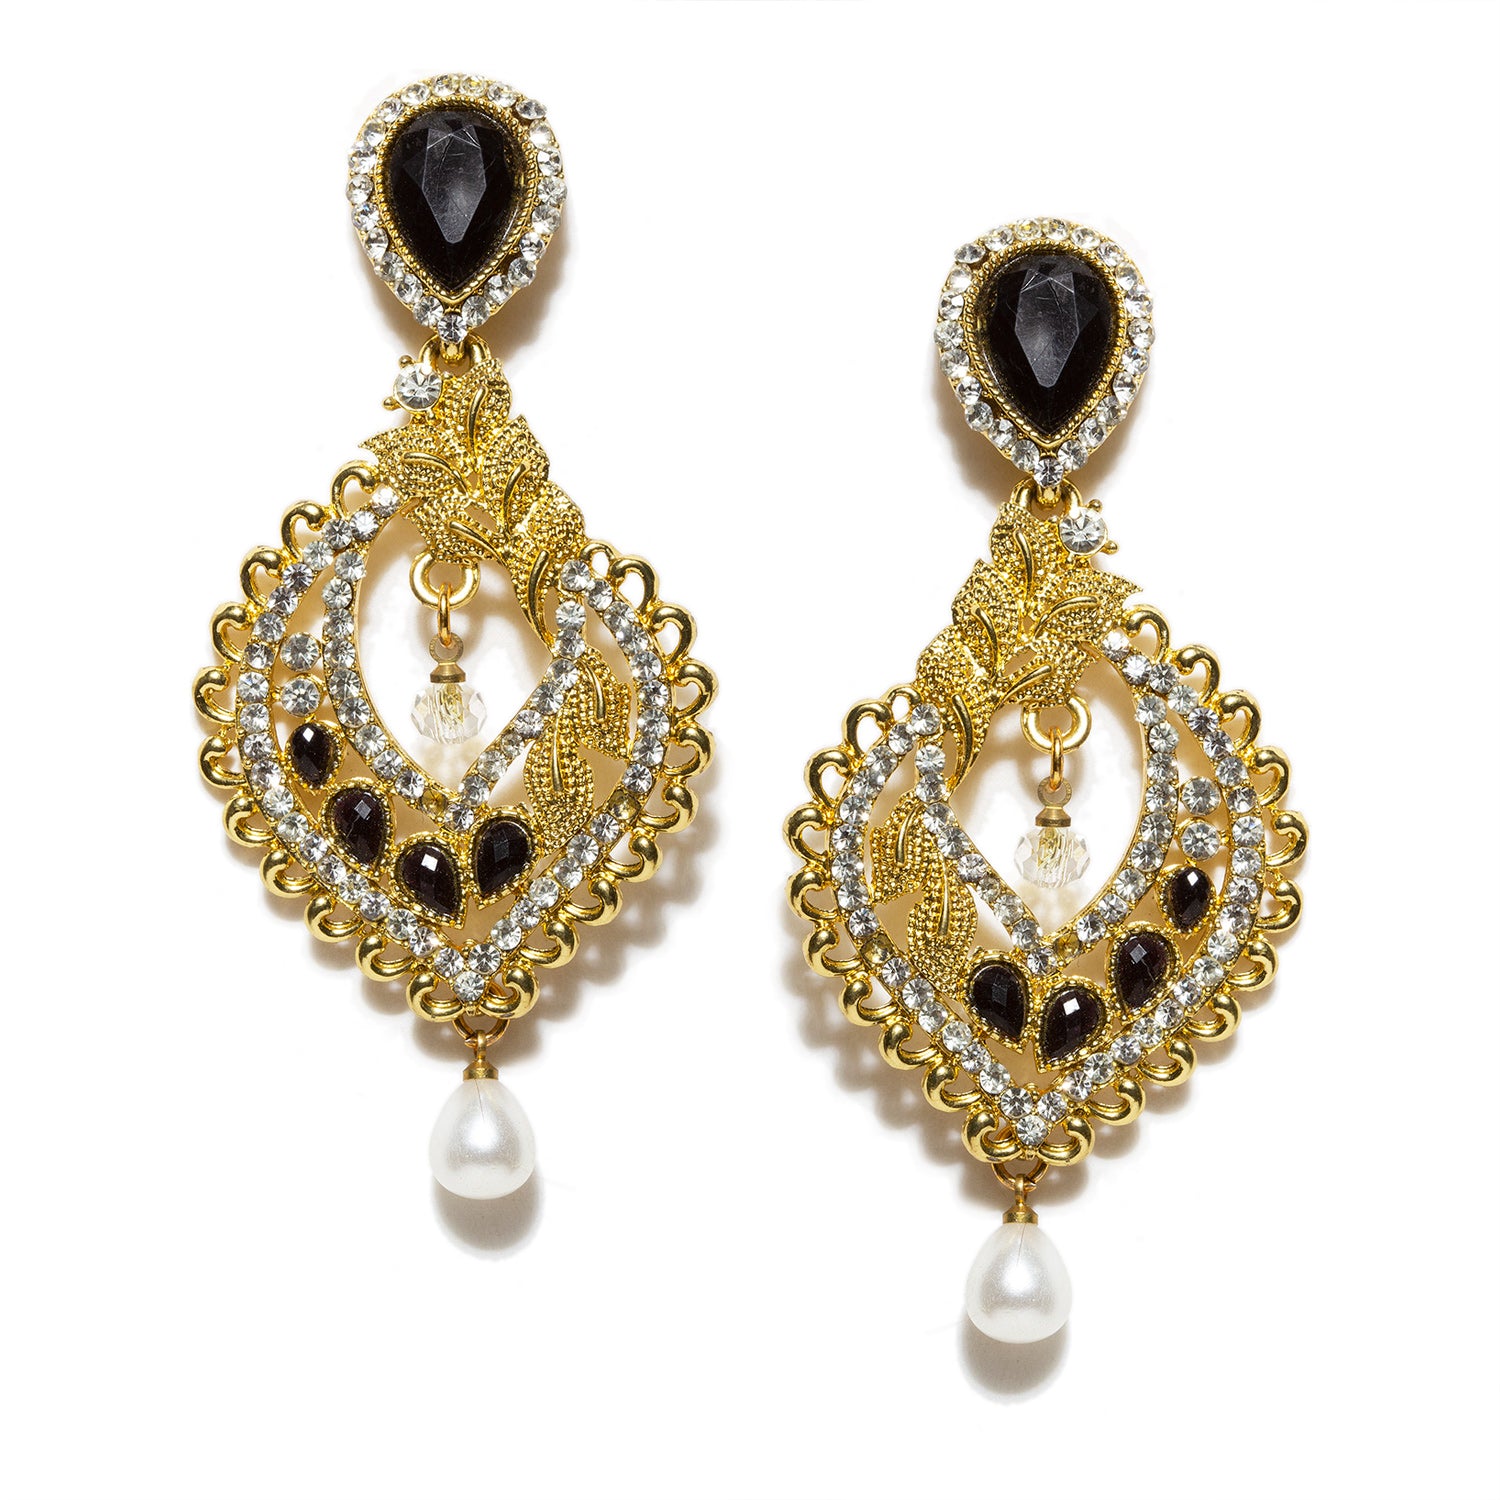 Buy Awesome Gold and White Stone Work Earrings Online